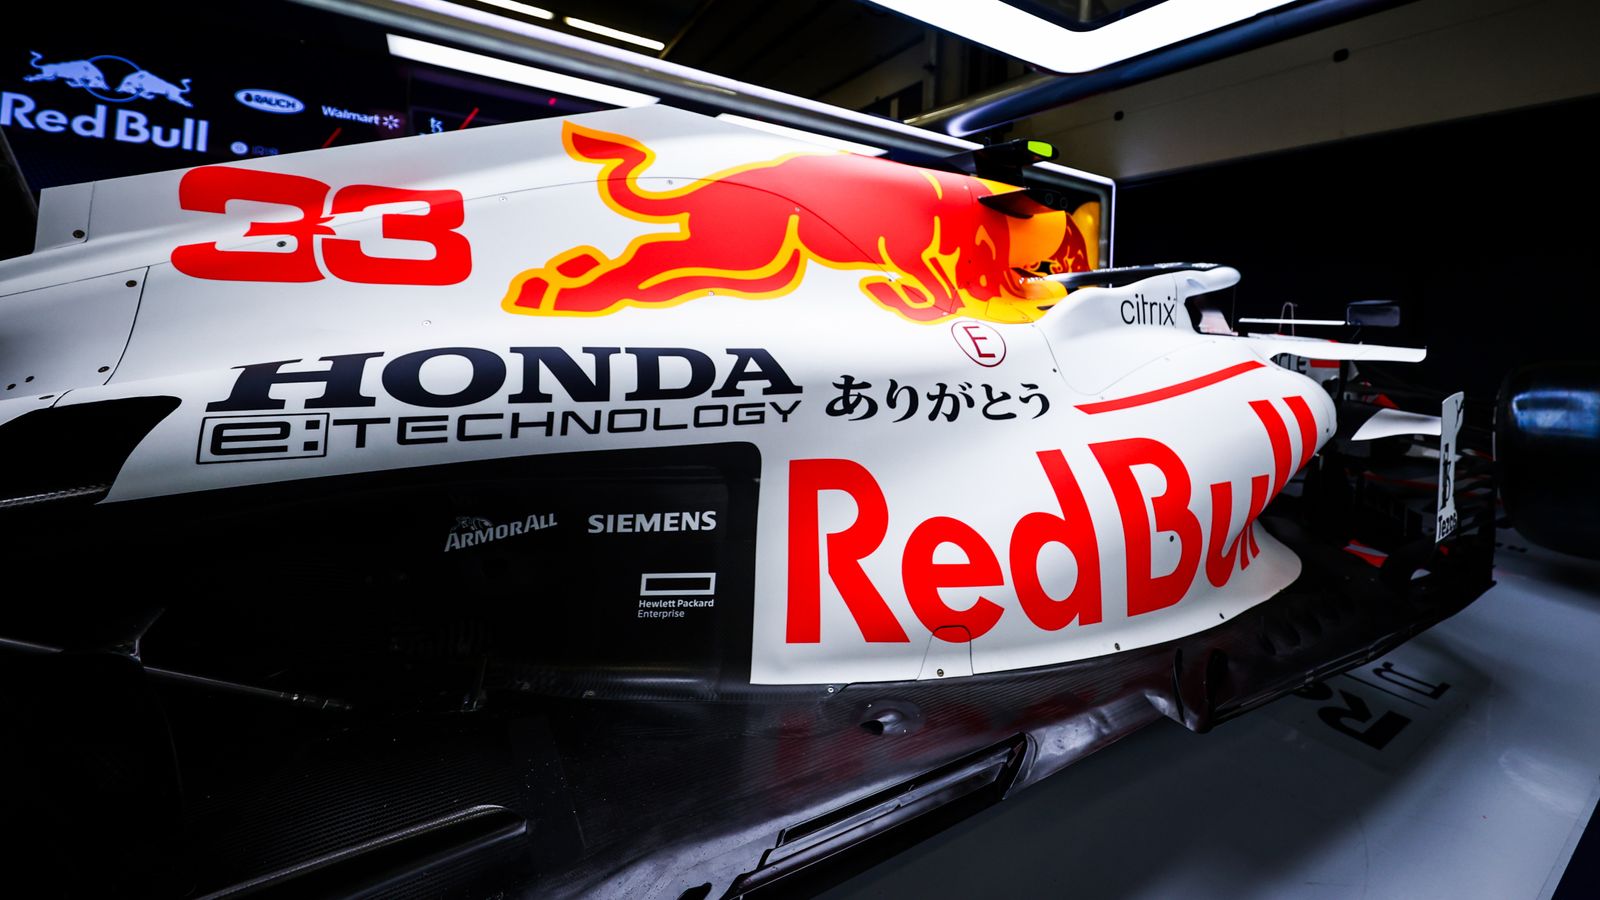 Turkish Gp Red Bull And Alphatauri To Race With Special Honda Tribute Liveries In Istanbul F1 News